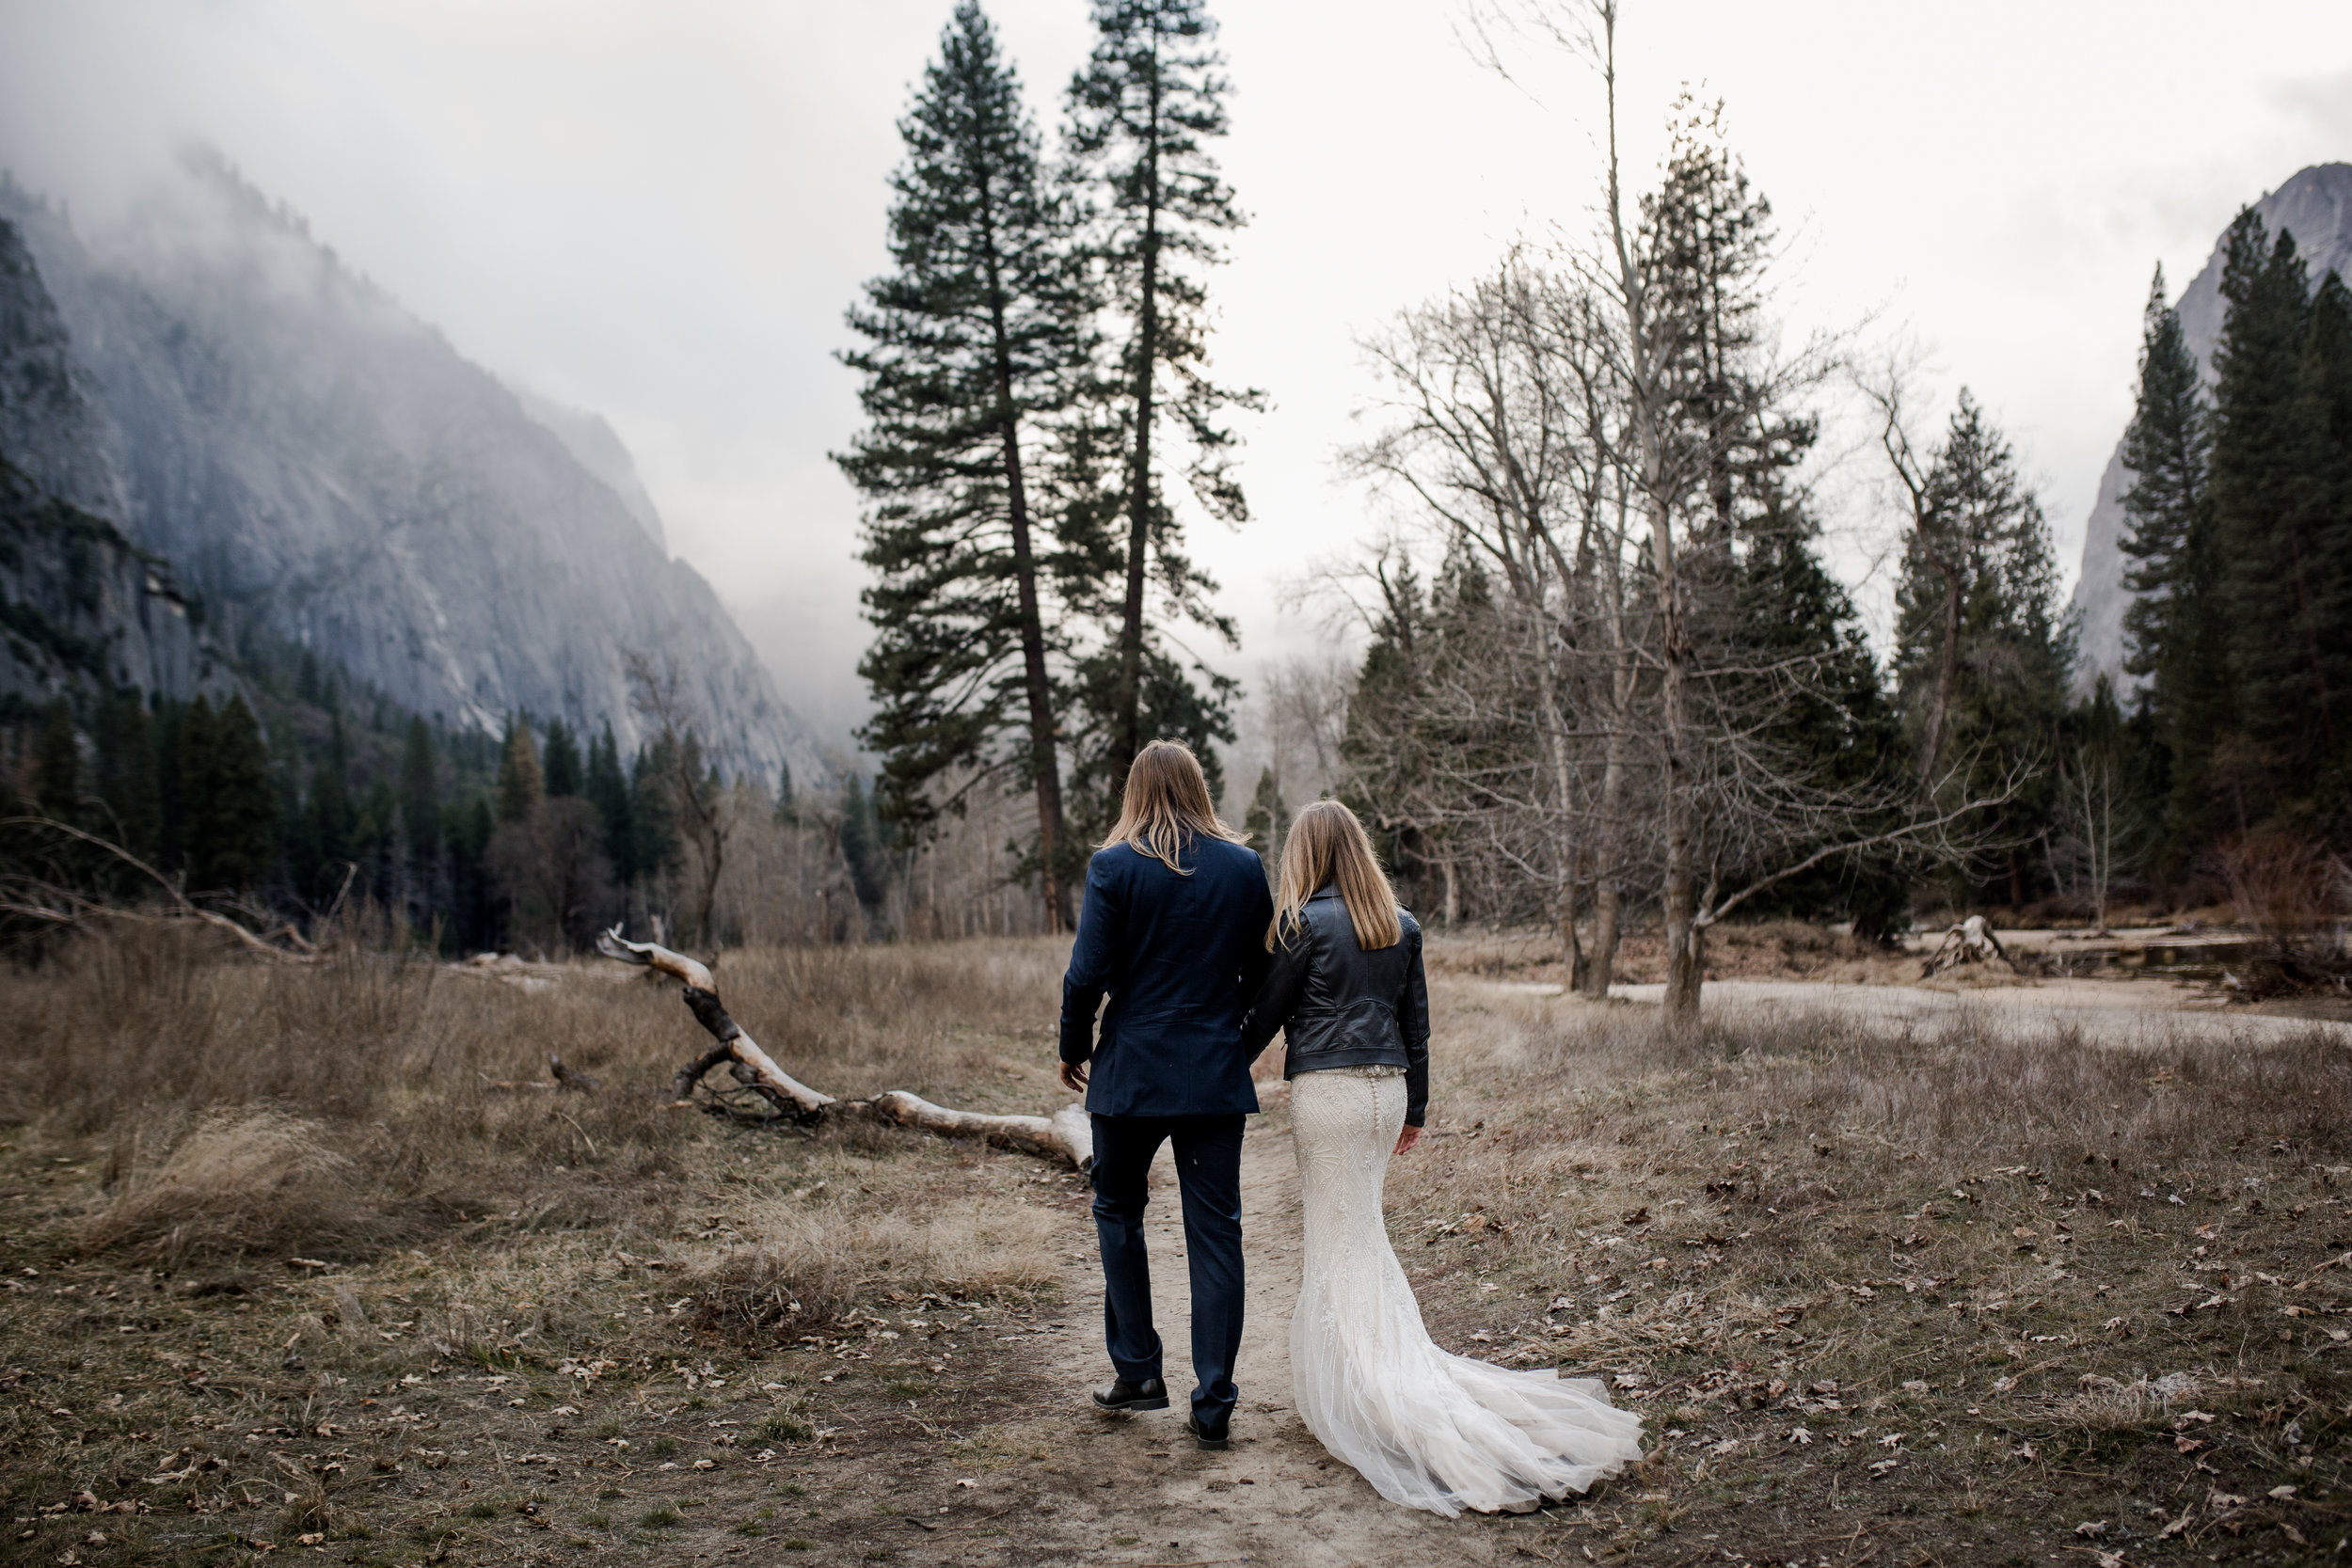 nicole-daacke-photography-yousemite-national-park-elopement-photographer-winter-cloud-moody-elope-inspiration-yosemite-valley-tunnel-view-winter-cloud-fog-weather-wedding-photos-54.jpg